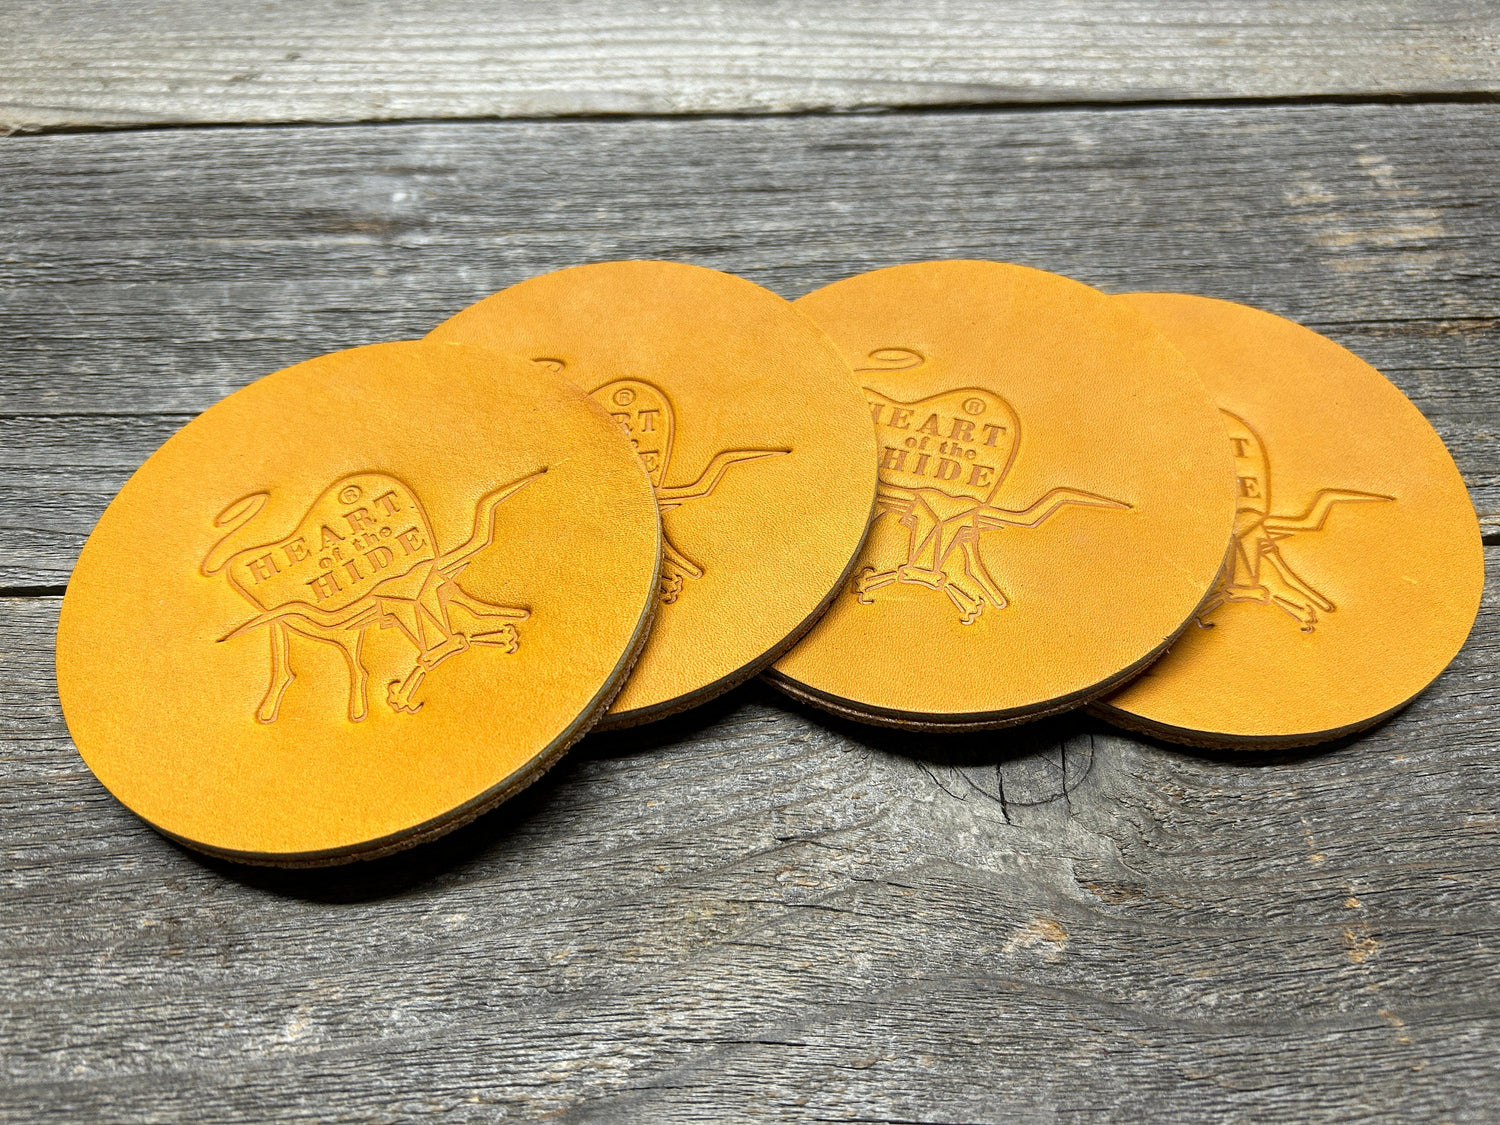 Set of 4 Coasters - Rawlings Heart of the Hide Horween Leather!